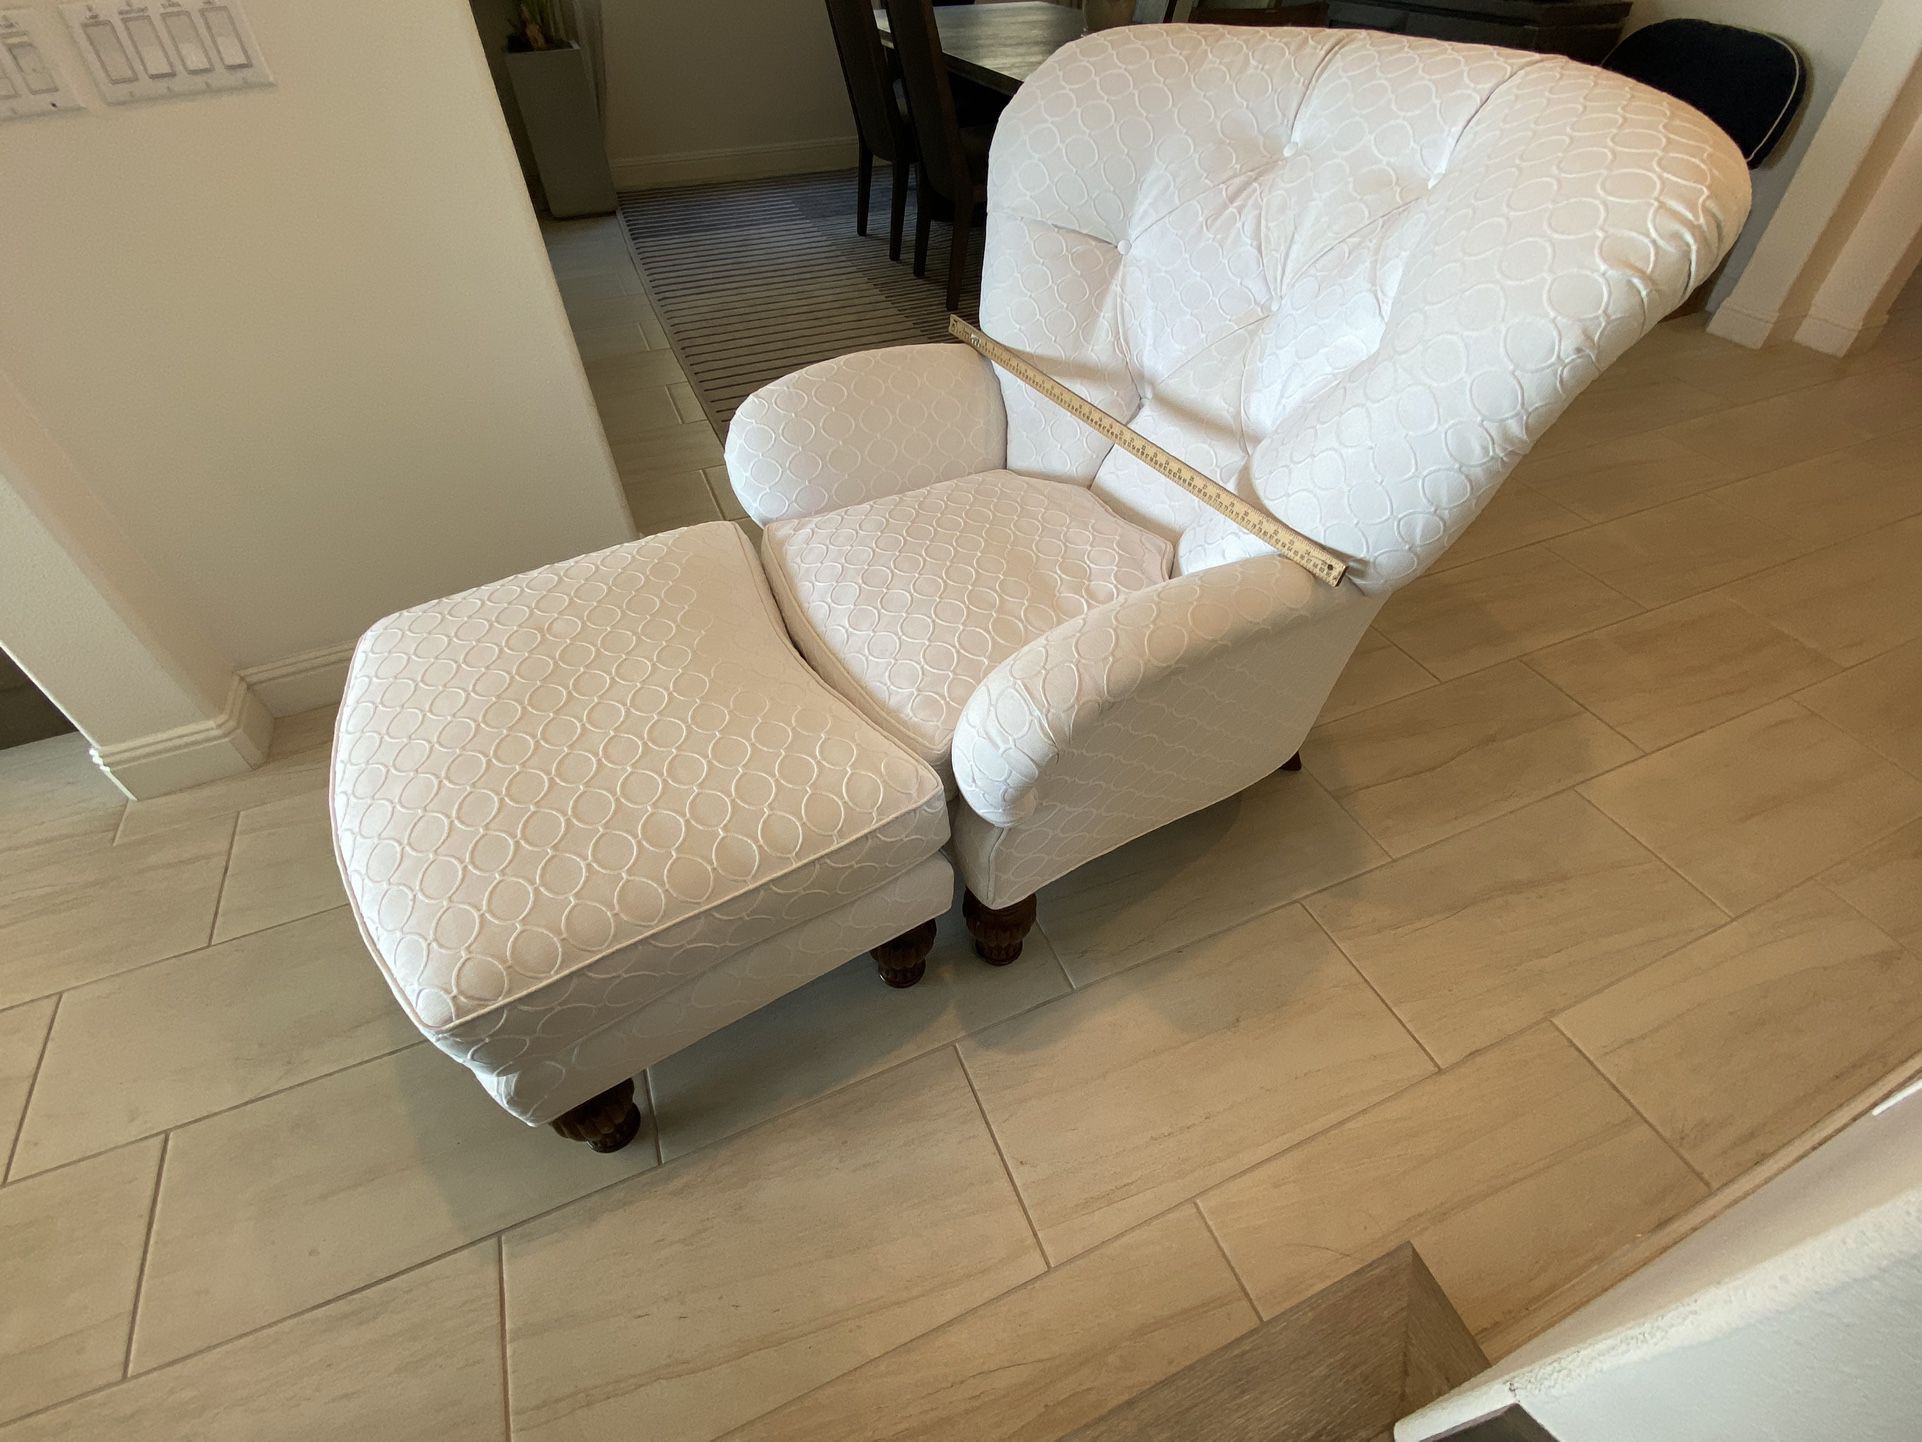 White chair and ottoman